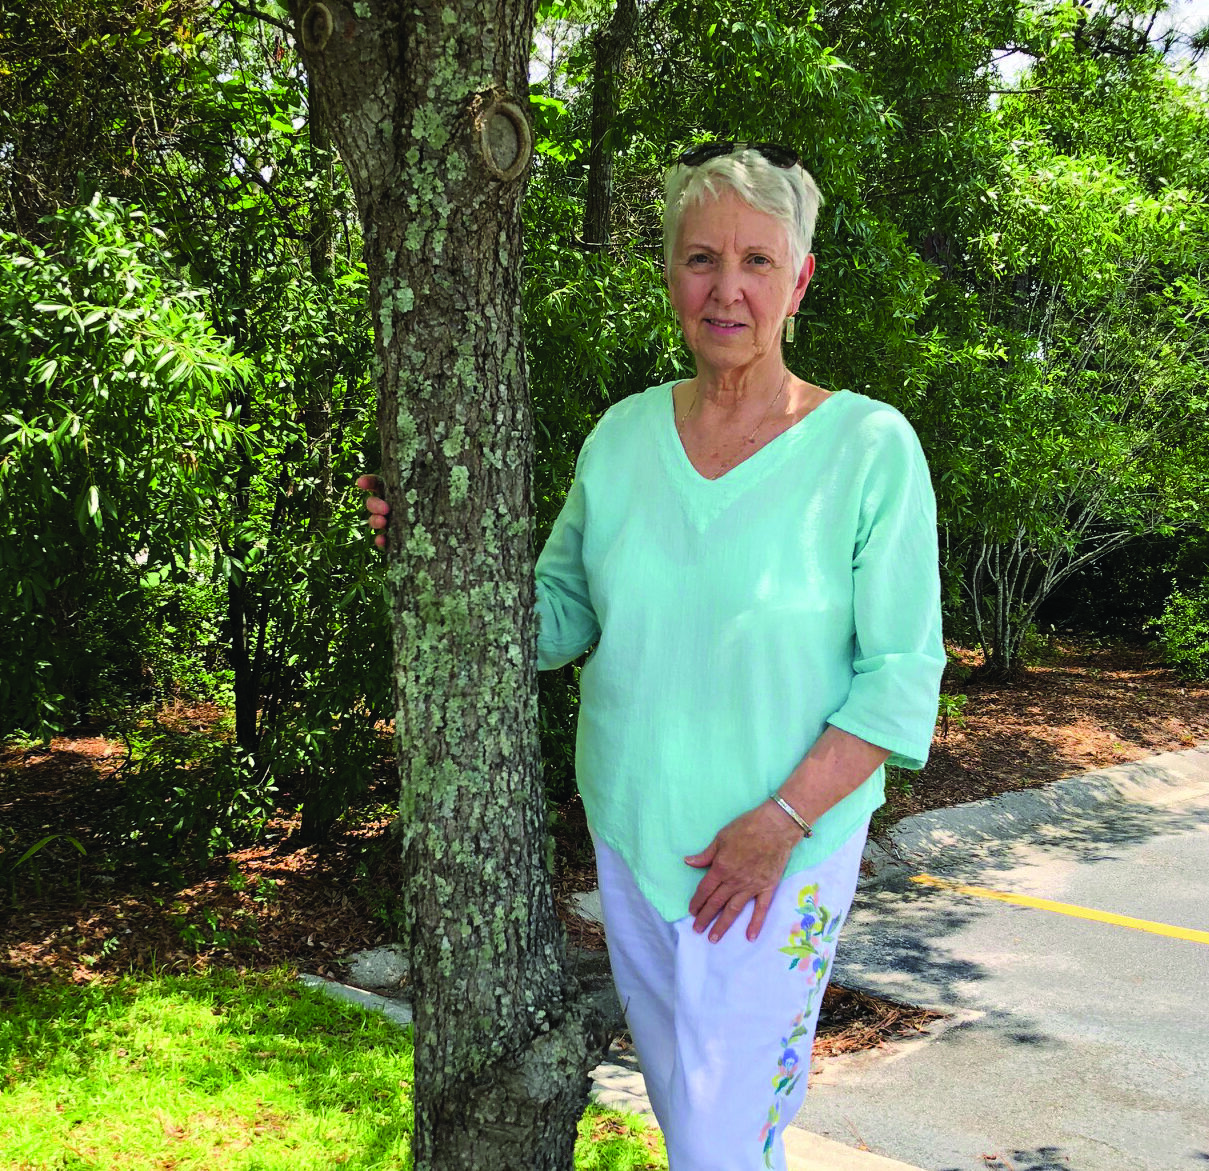 Judy Cote (Summer 2018) “The East Smart Live Longer Club Saved Her Health: Battling extra weight, high BP and thyroid issues, Judy Cote’s health answers were found in Hilton Head, South Carolina.” (by J. Lanning Smith)